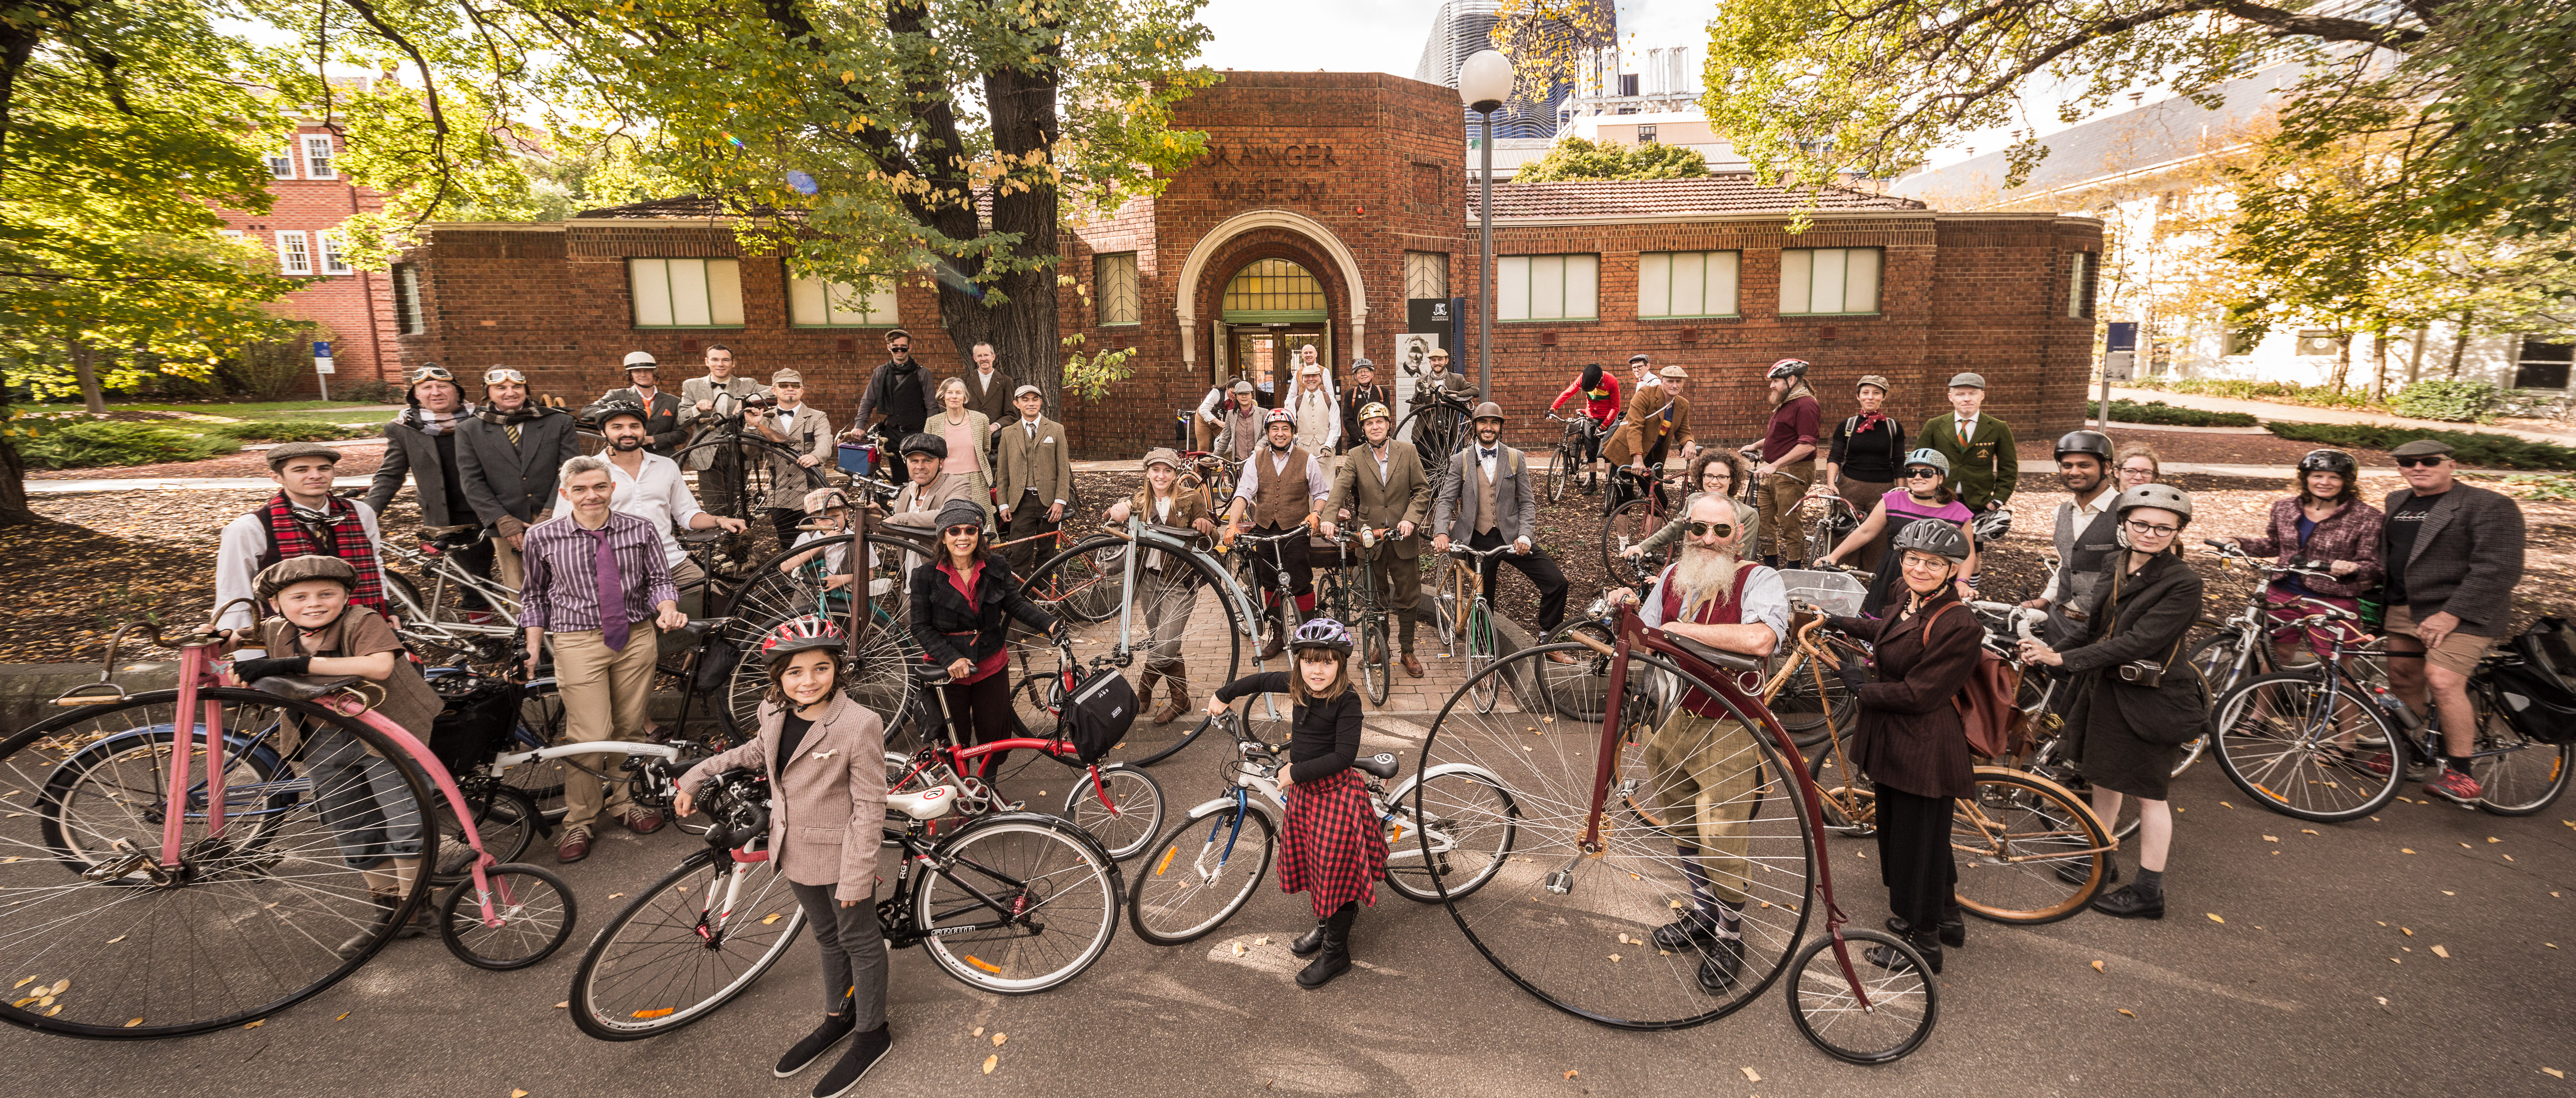 Image for 2017 Melbourne Tweed Ride